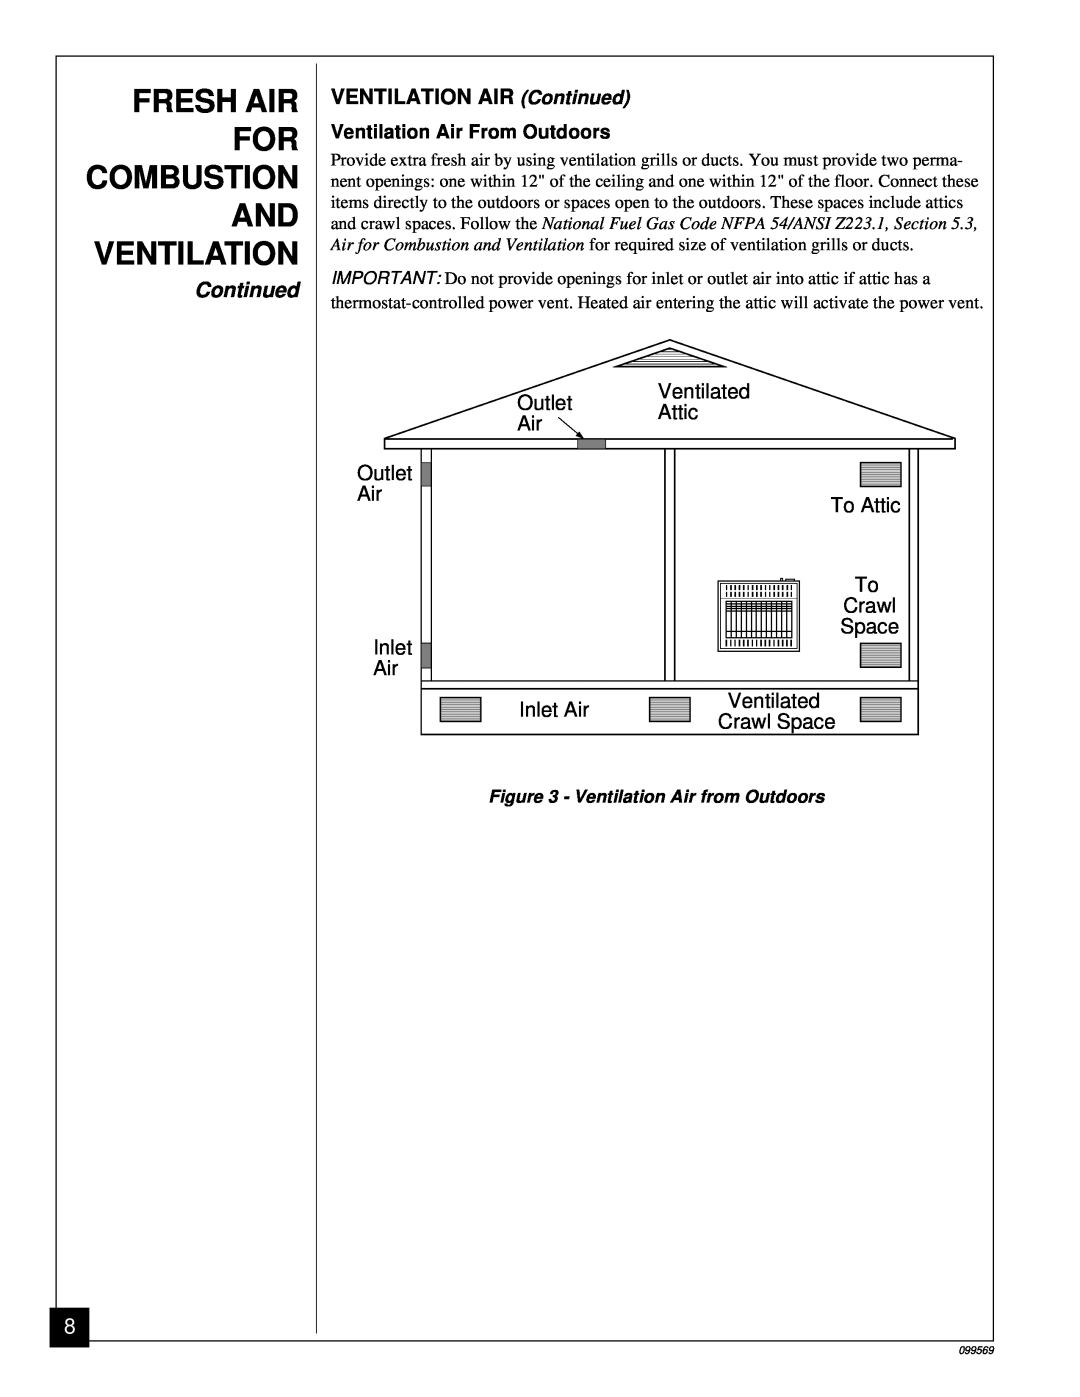 Desa Fresh Air For Combustion And Ventilation, Continued, Ventilated Outlet Attic Air, To Attic, Inlet Air, Crawl Space 